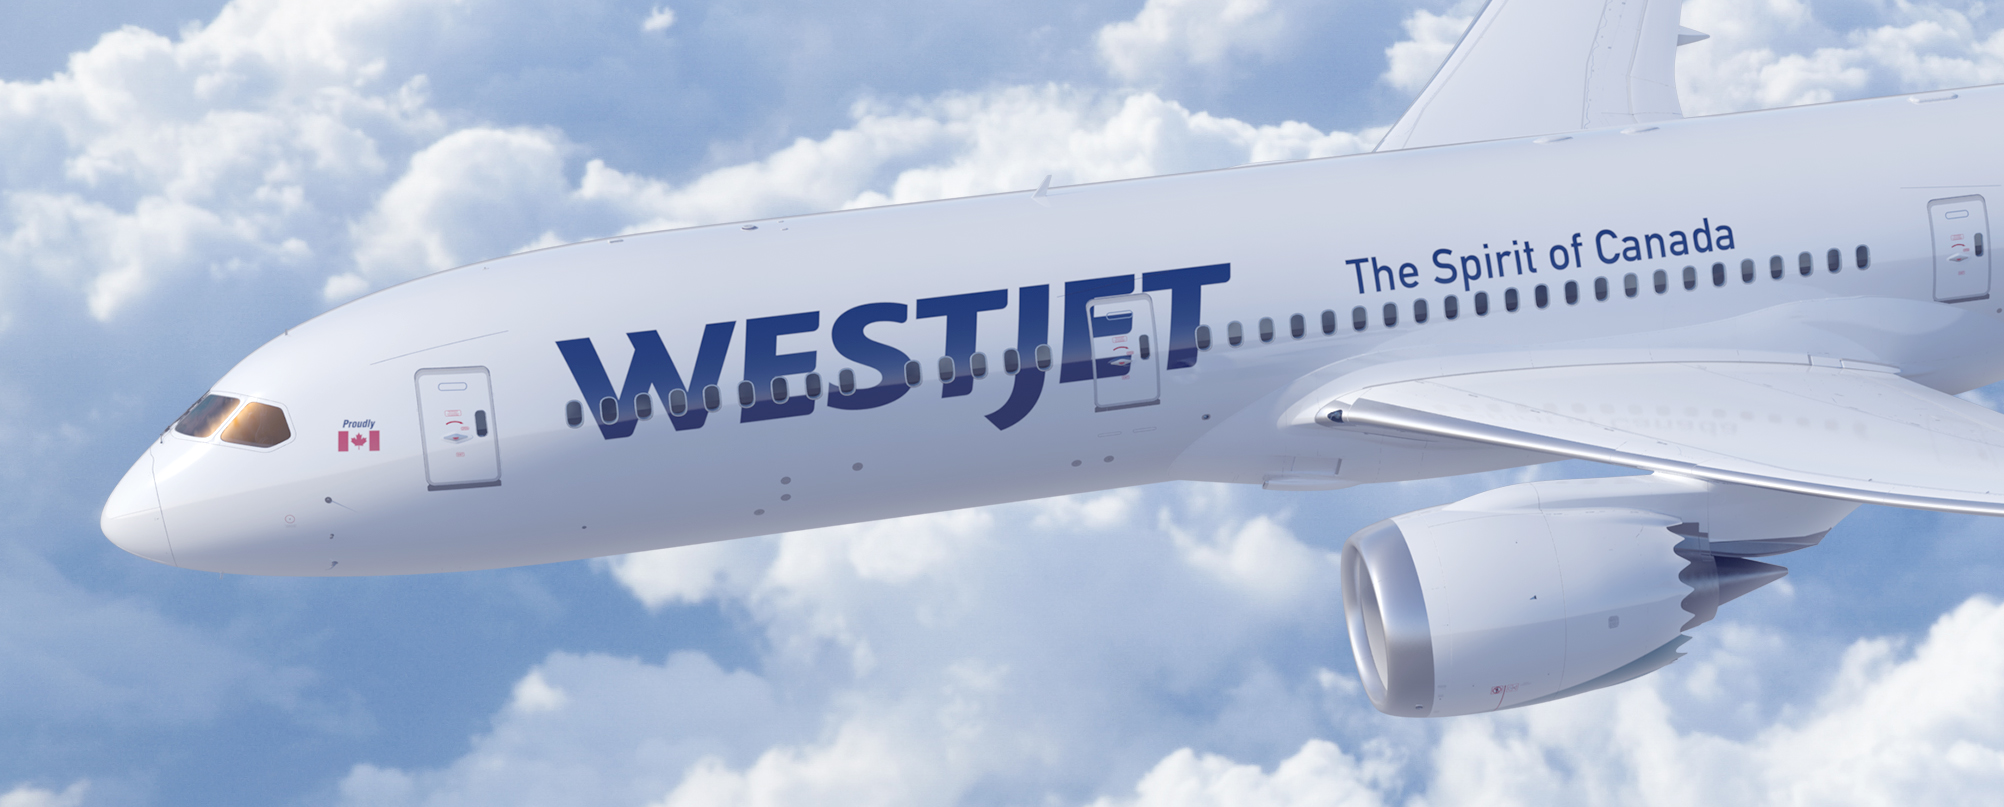 Westjet Reveals New Livery And Impressive 787 Long Haul Product